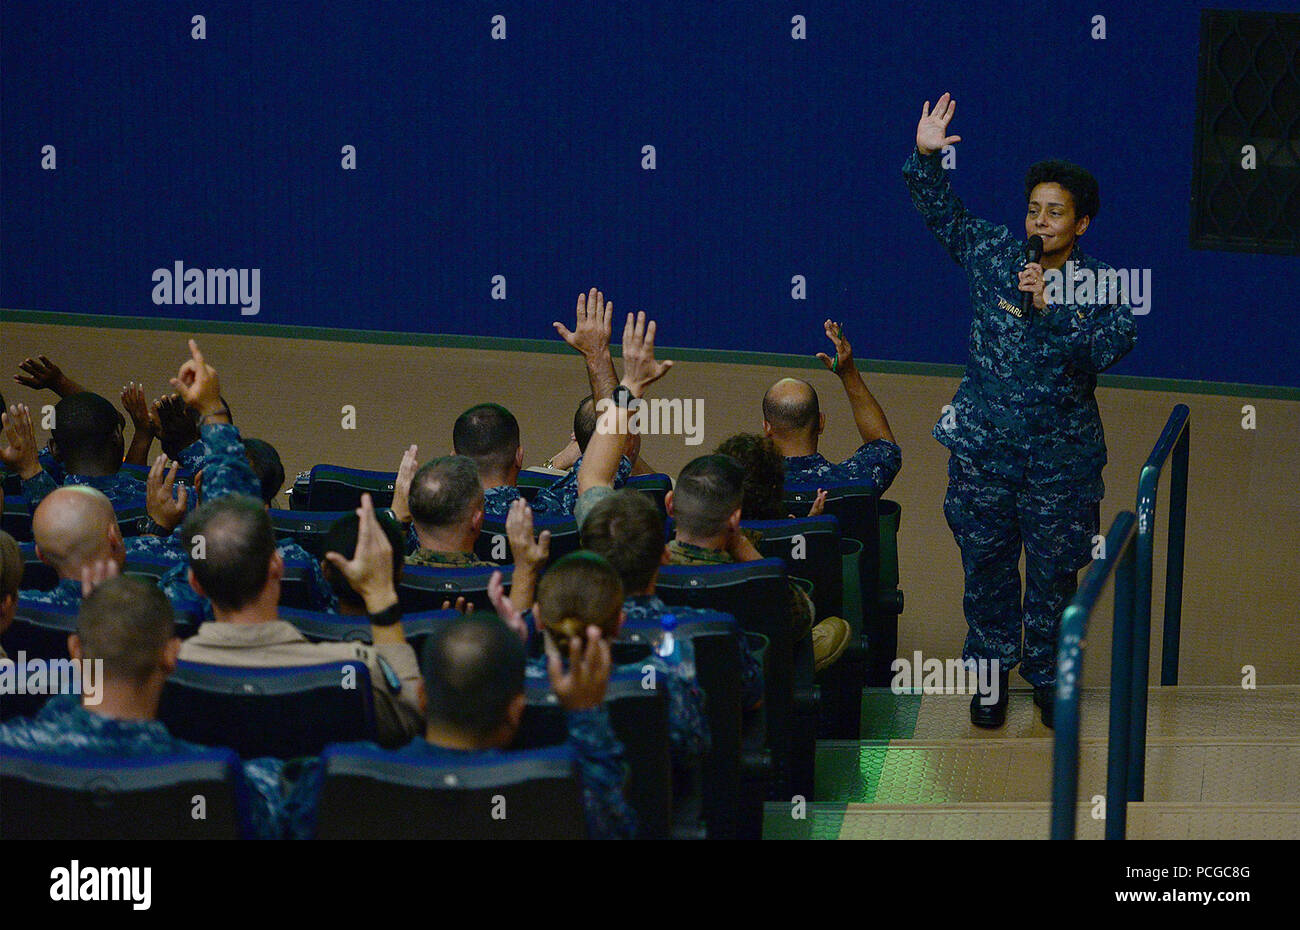 NAS SIGONELLA, Sicily (Aug. 1, 2016) Commander, U.S. Naval Forces Europe-Africa, Adm. Michelle Howard poses a question to the audience during an all-hands call at the Naval Air Station (NAS) Sigonella base theater, Aug. 1. NAS Sigonella enables the forward operations and responsiveness of U.S. and allied forces in support of Navy Region Europe, Africa, Southwest Asia's mission to provide services to the Fleet, Fighter, and Family. Stock Photo